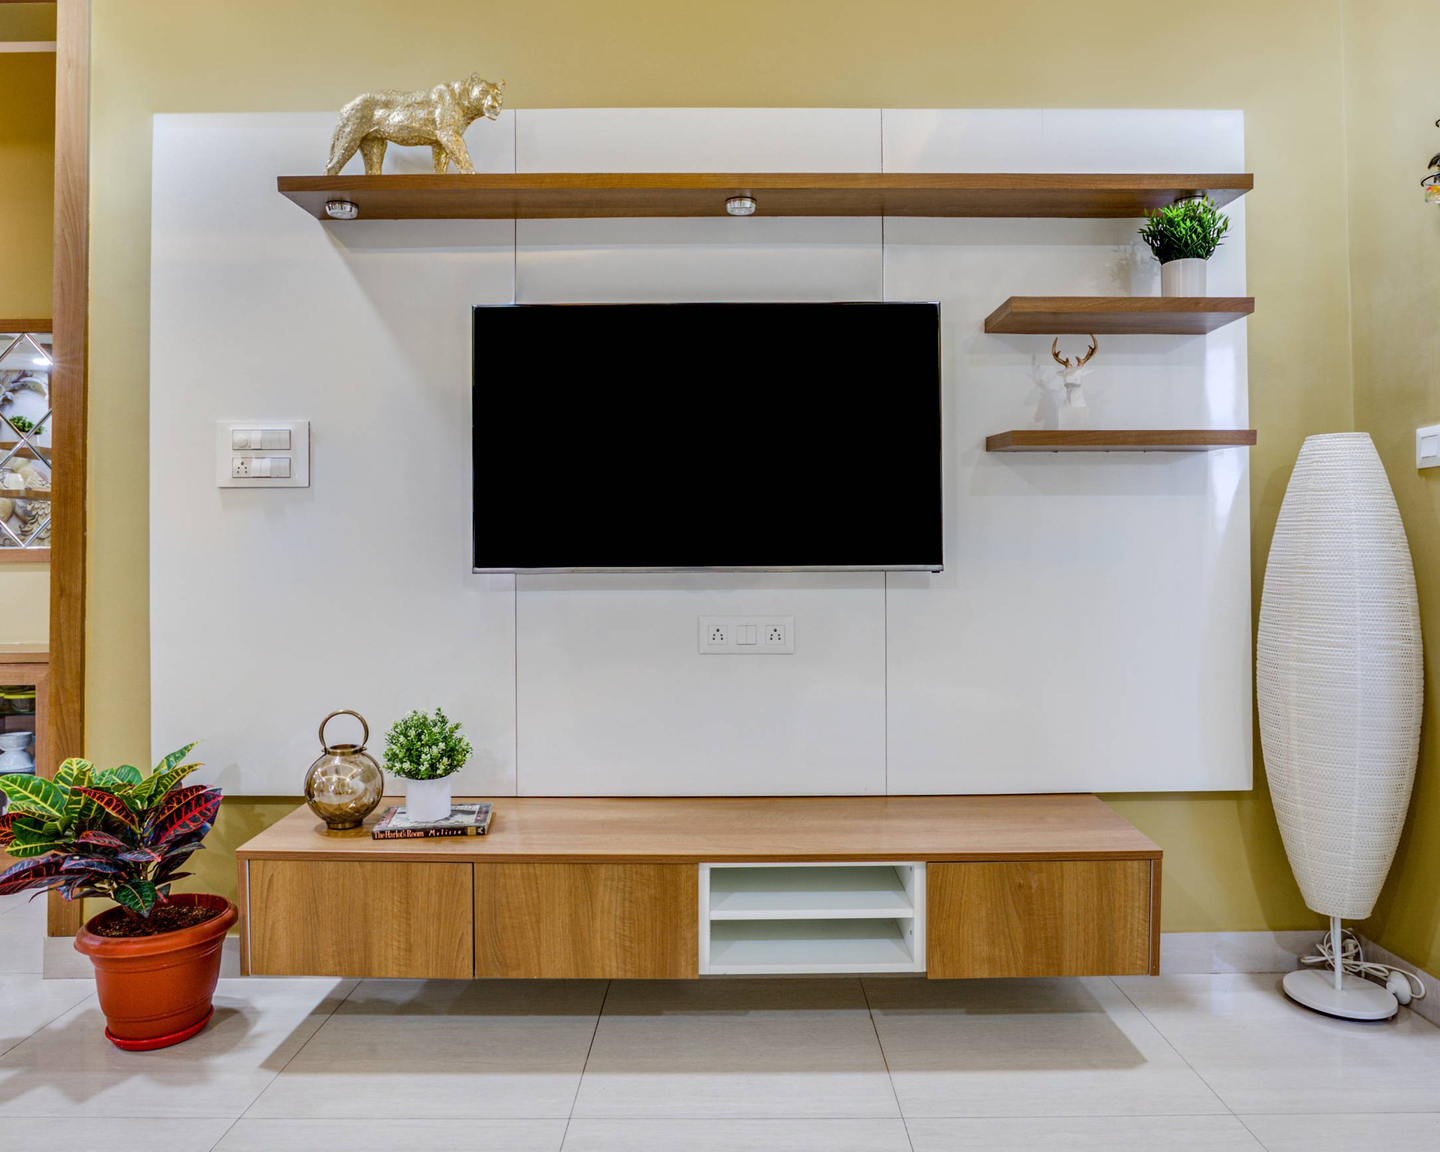 TV Unit With Wall Shelves - Livspace